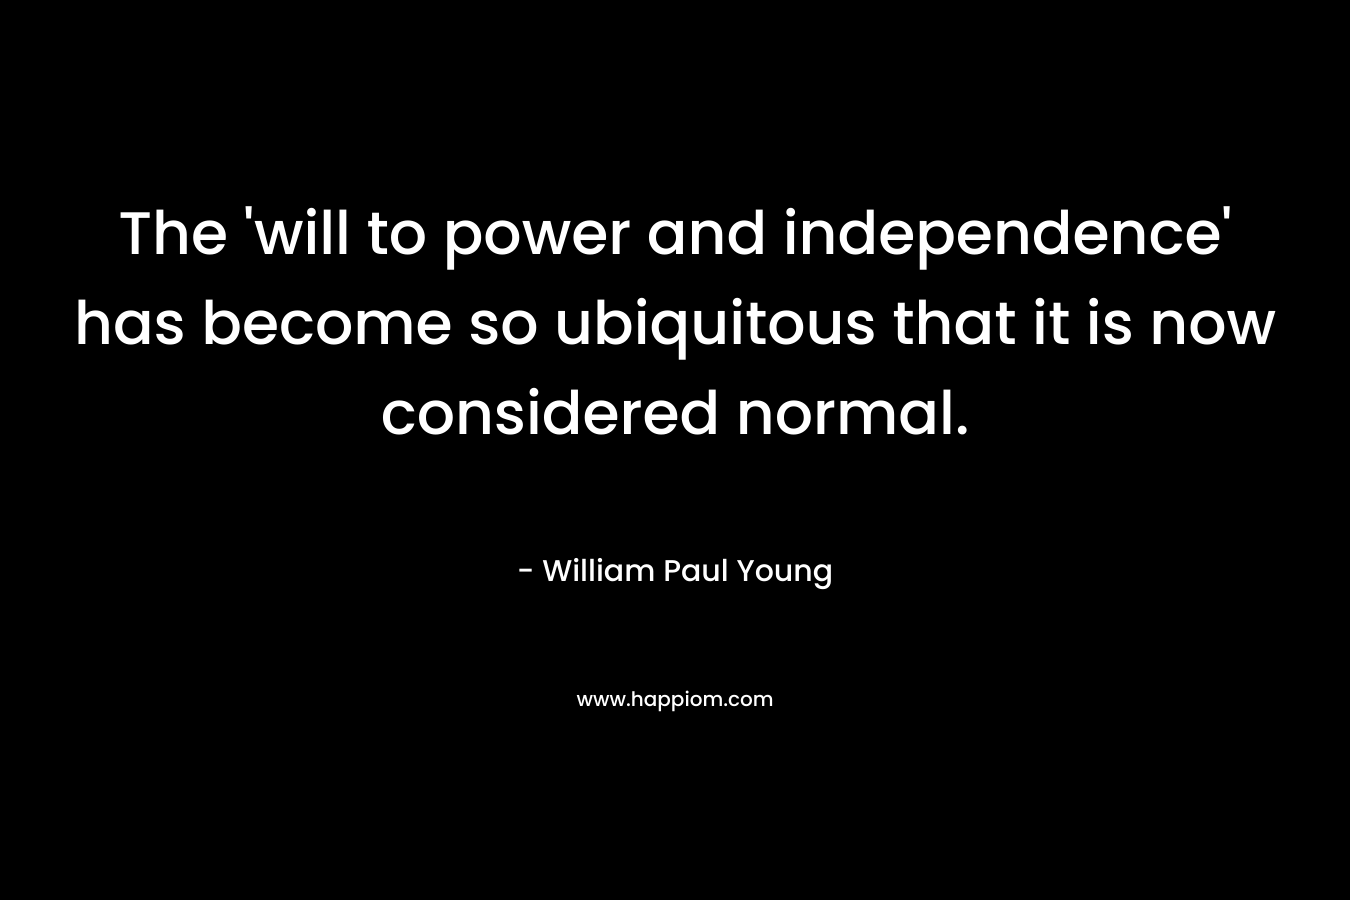 The 'will to power and independence' has become so ubiquitous that it is now considered normal.